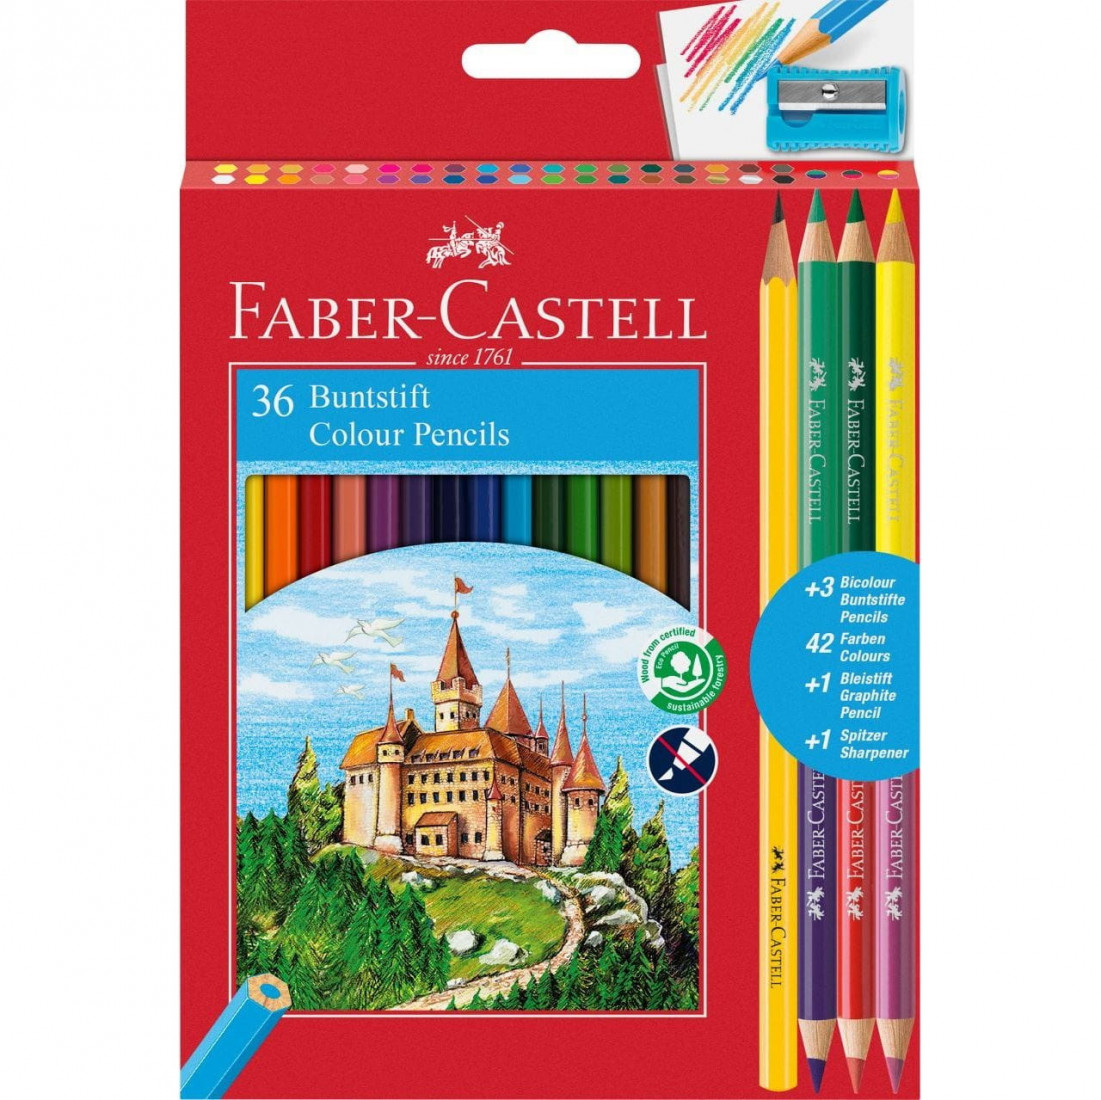 Faber Castell classic colour pencils, 41 pieces with sharpener, 110336